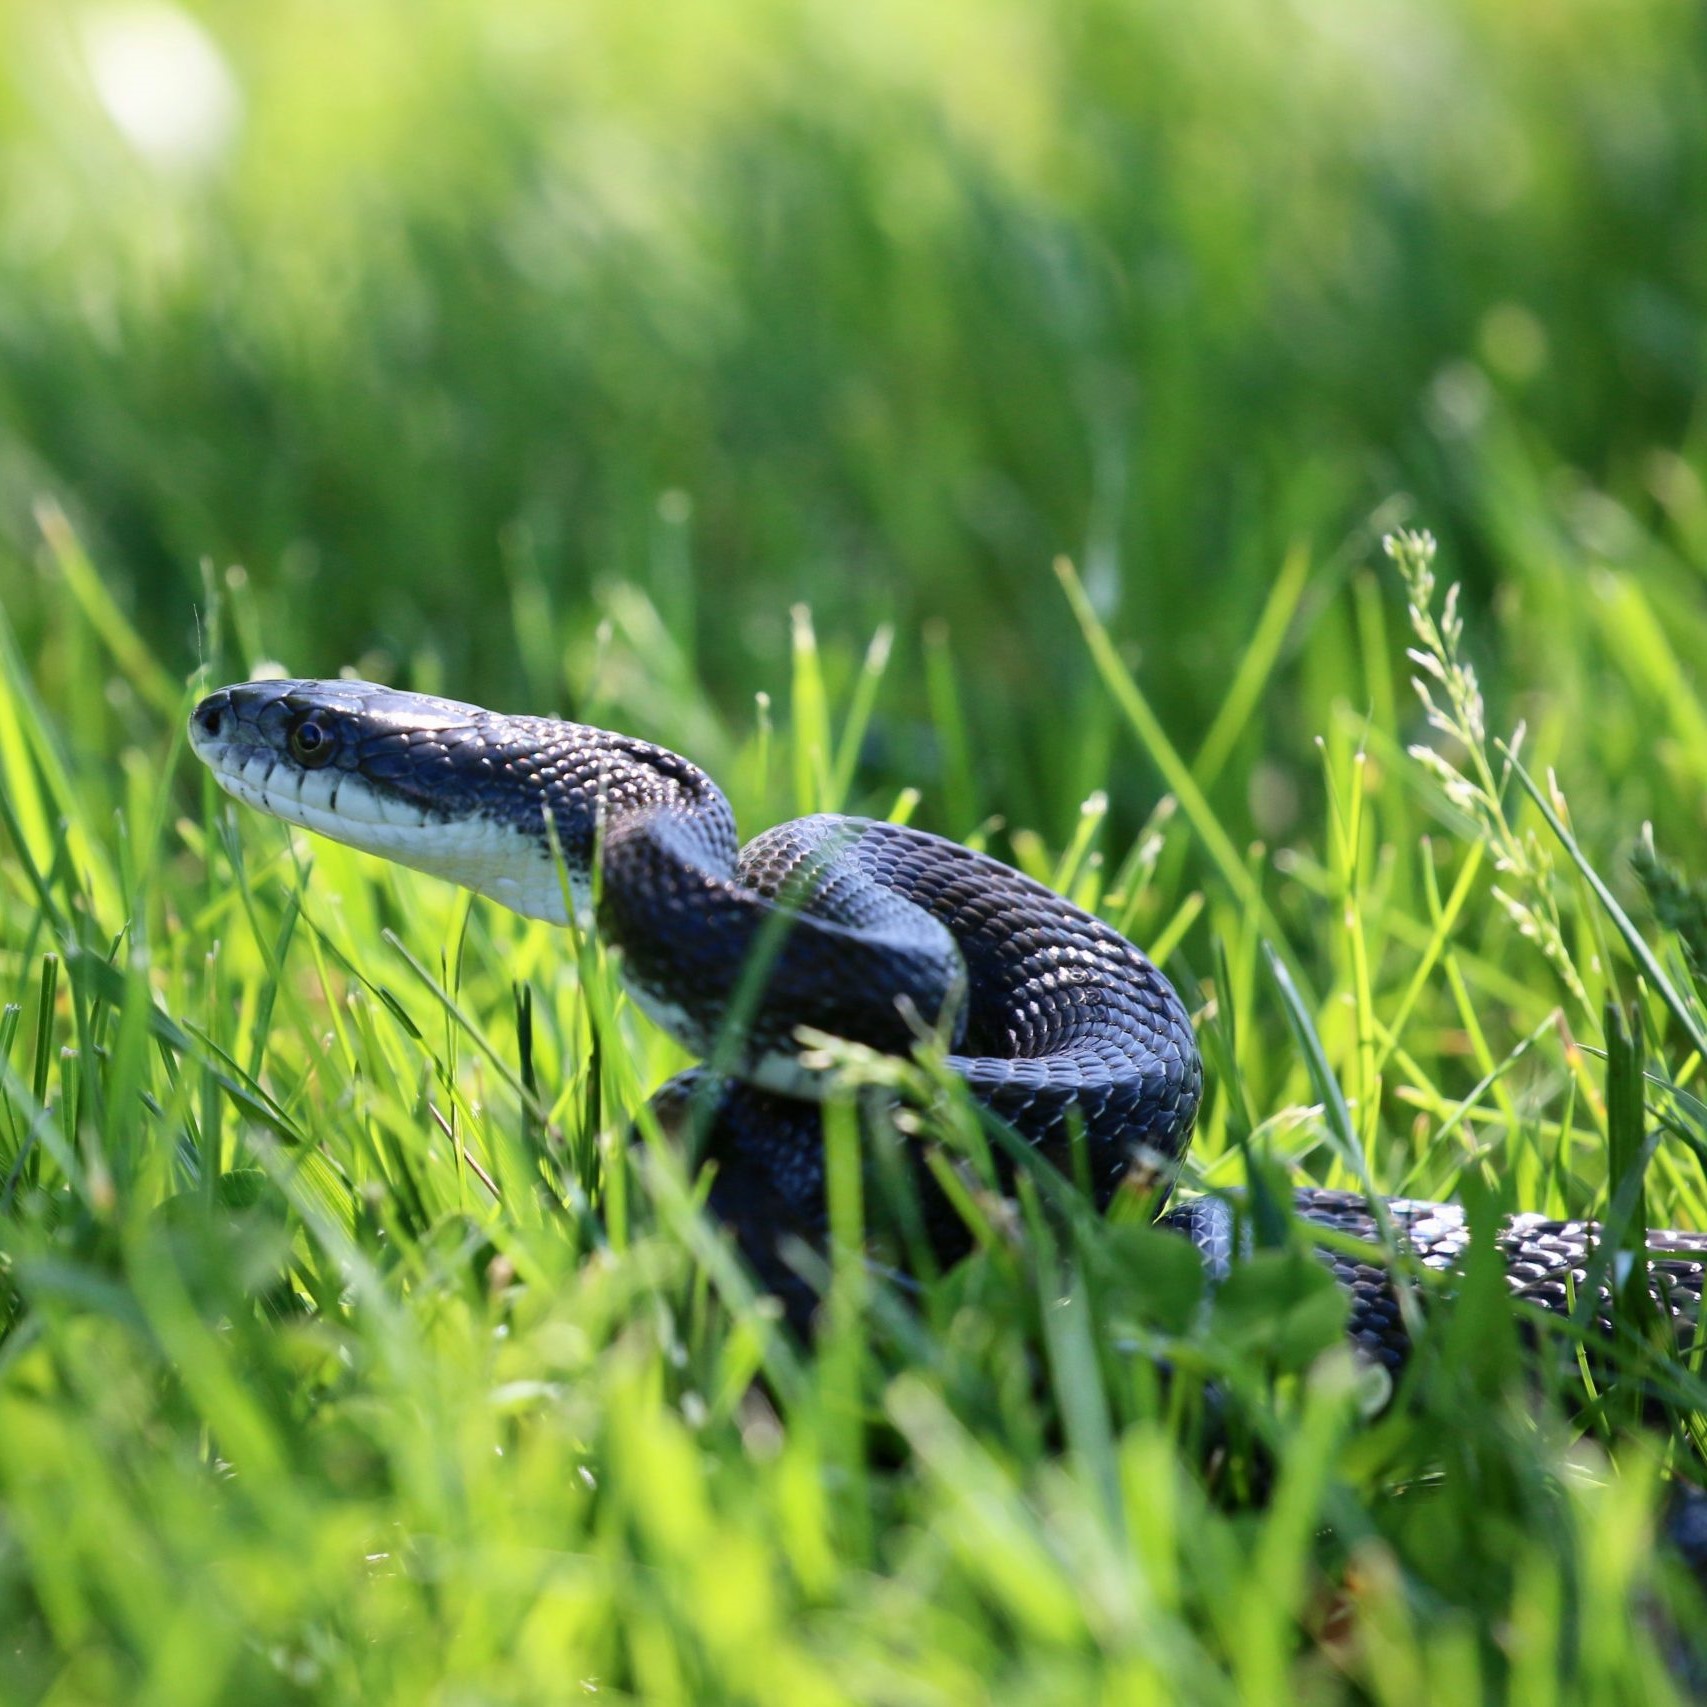 an eastern rat snake sitting in the grass